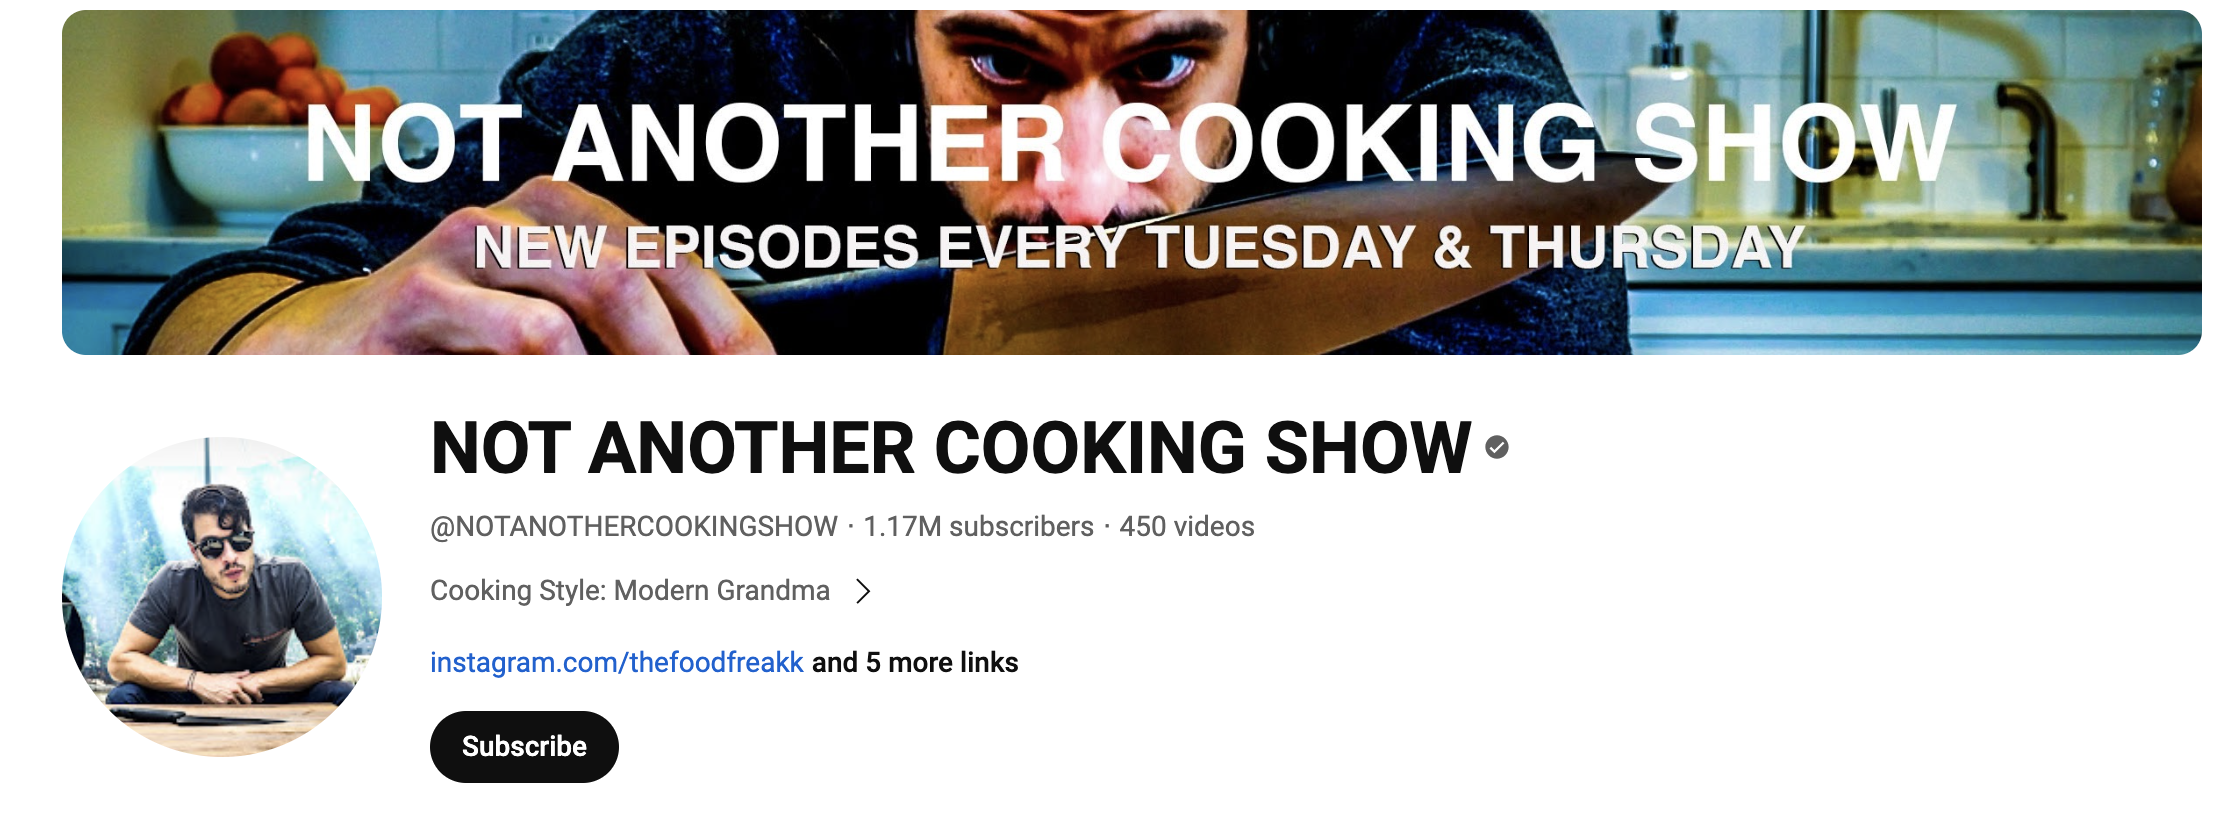 Banner for the YouTube channel "Not Another Cooking Show"